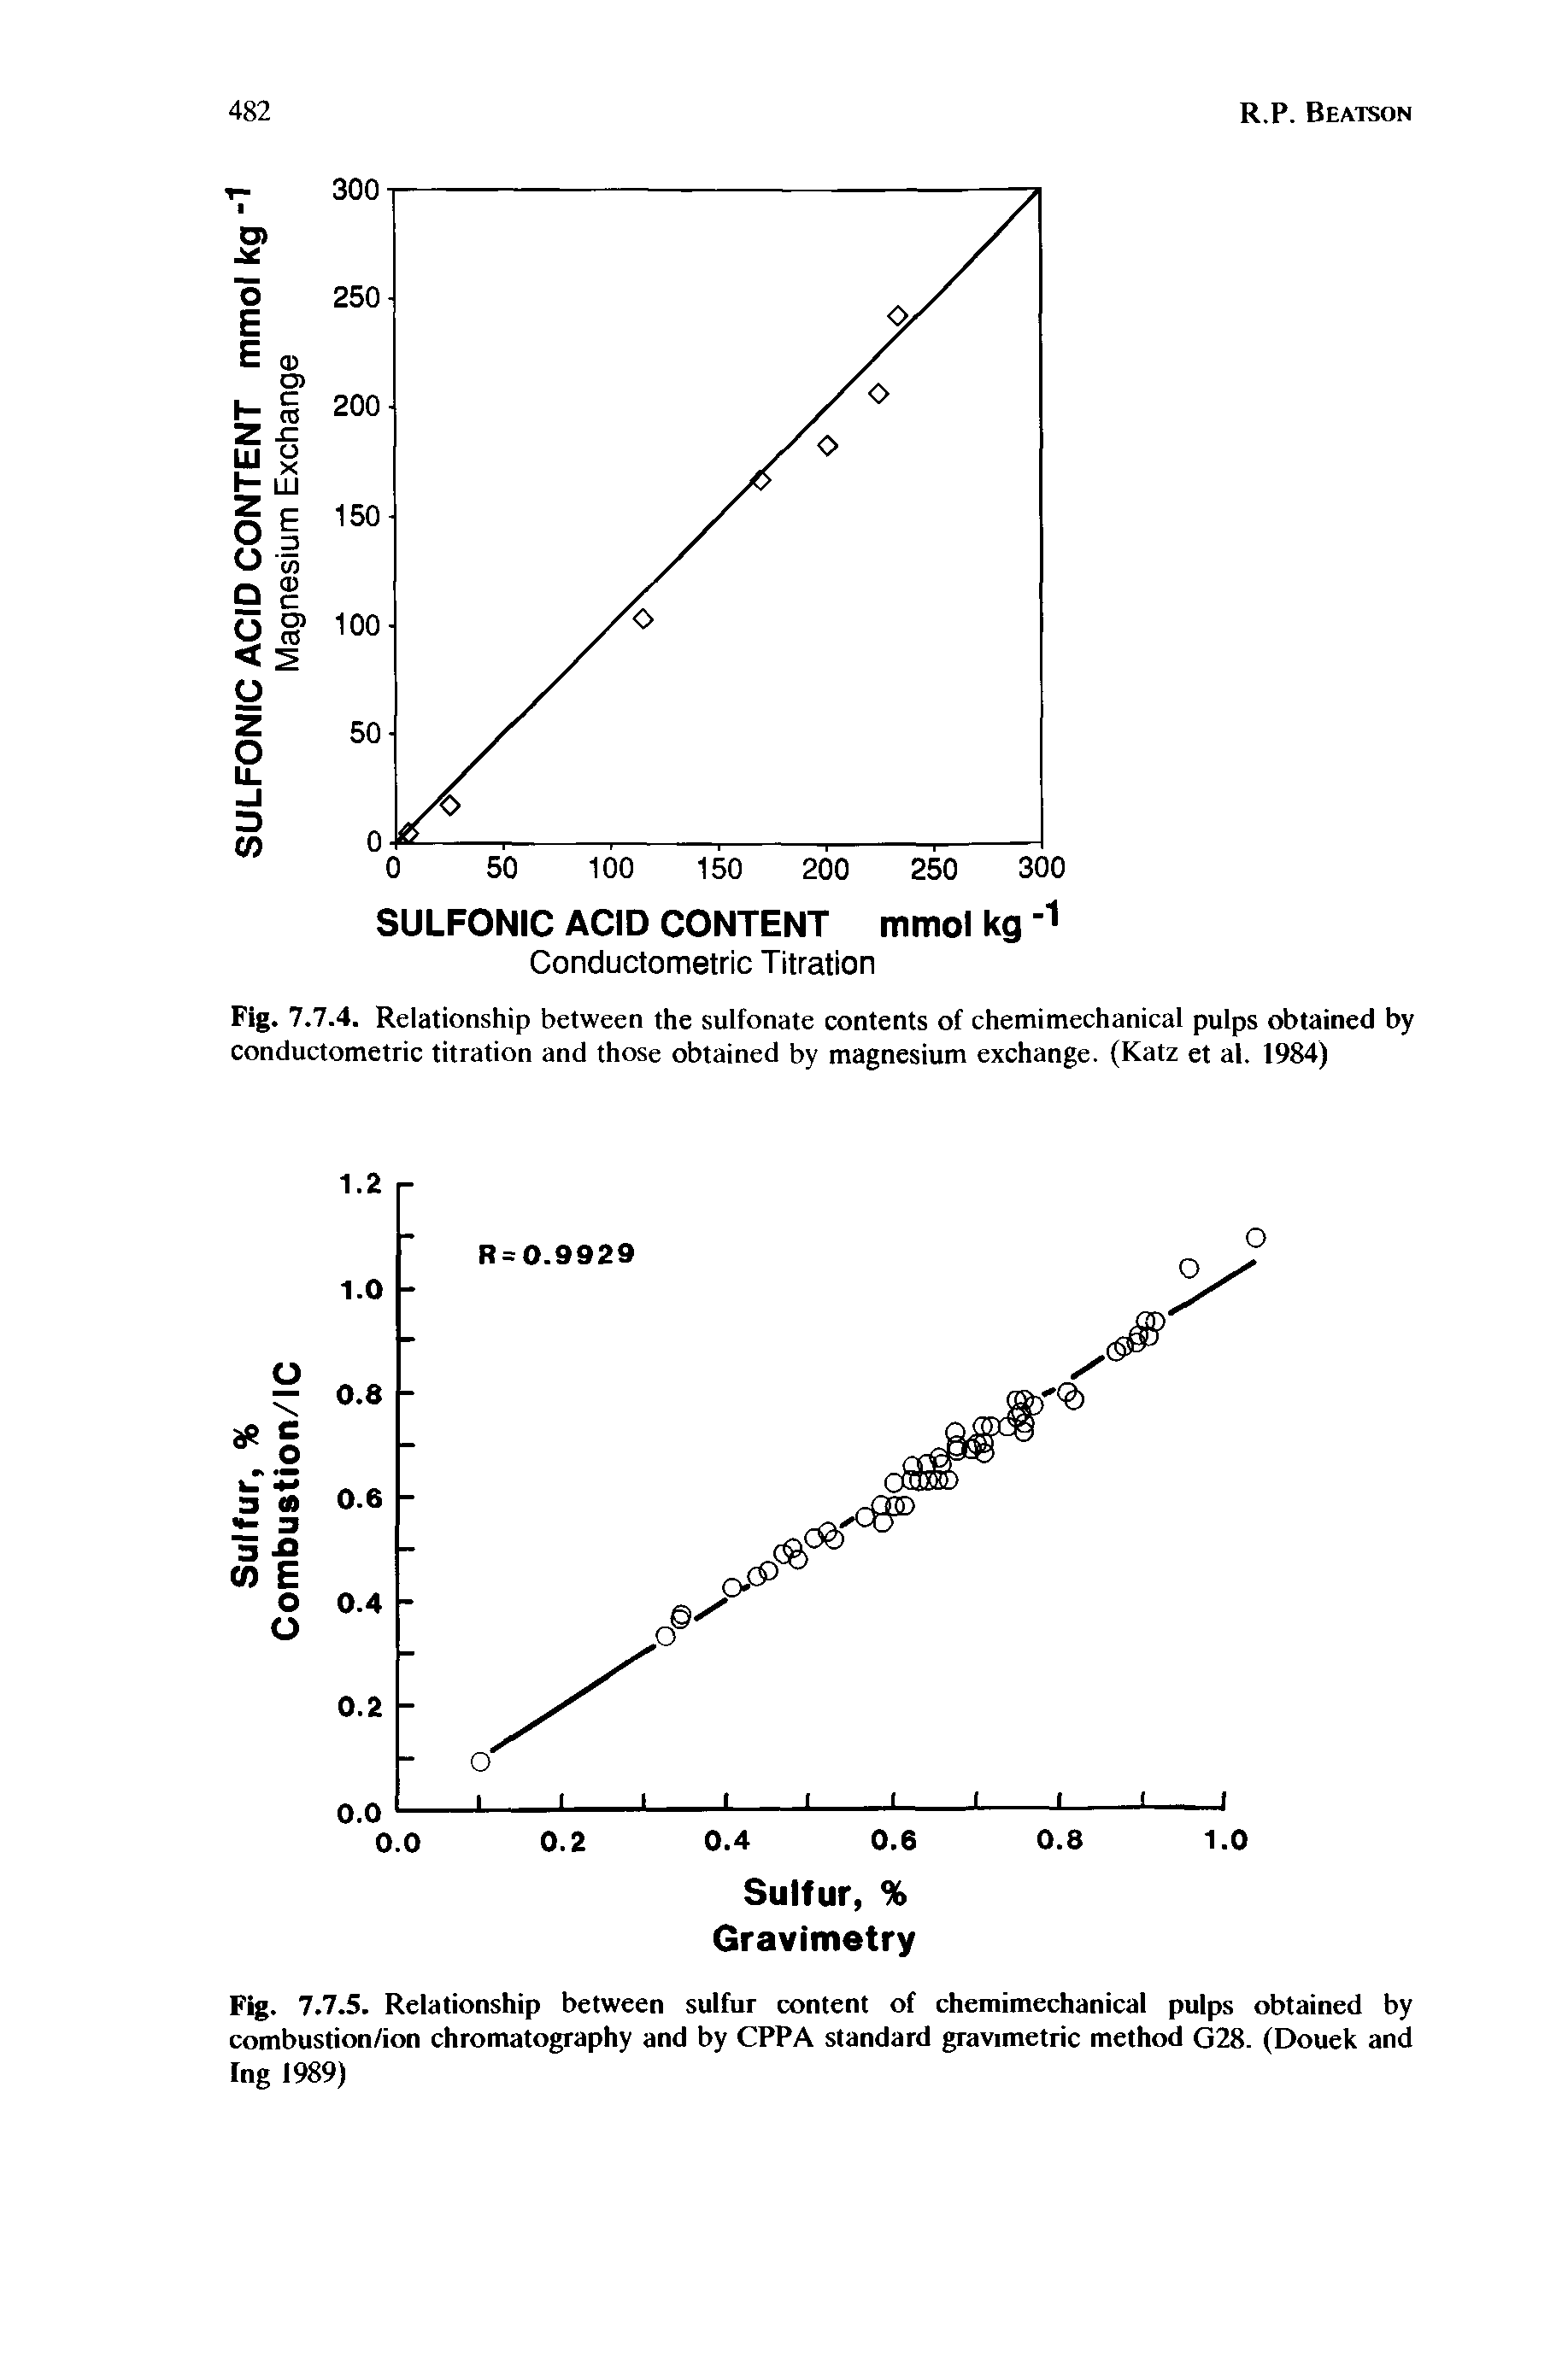 Fig. 7.7.5. Relationship between sulfur content of chemimechanical pulps obtained by combustion/ion chromatography and by CPPA standard gravimetric method G28. (Douek and fng 1989)...